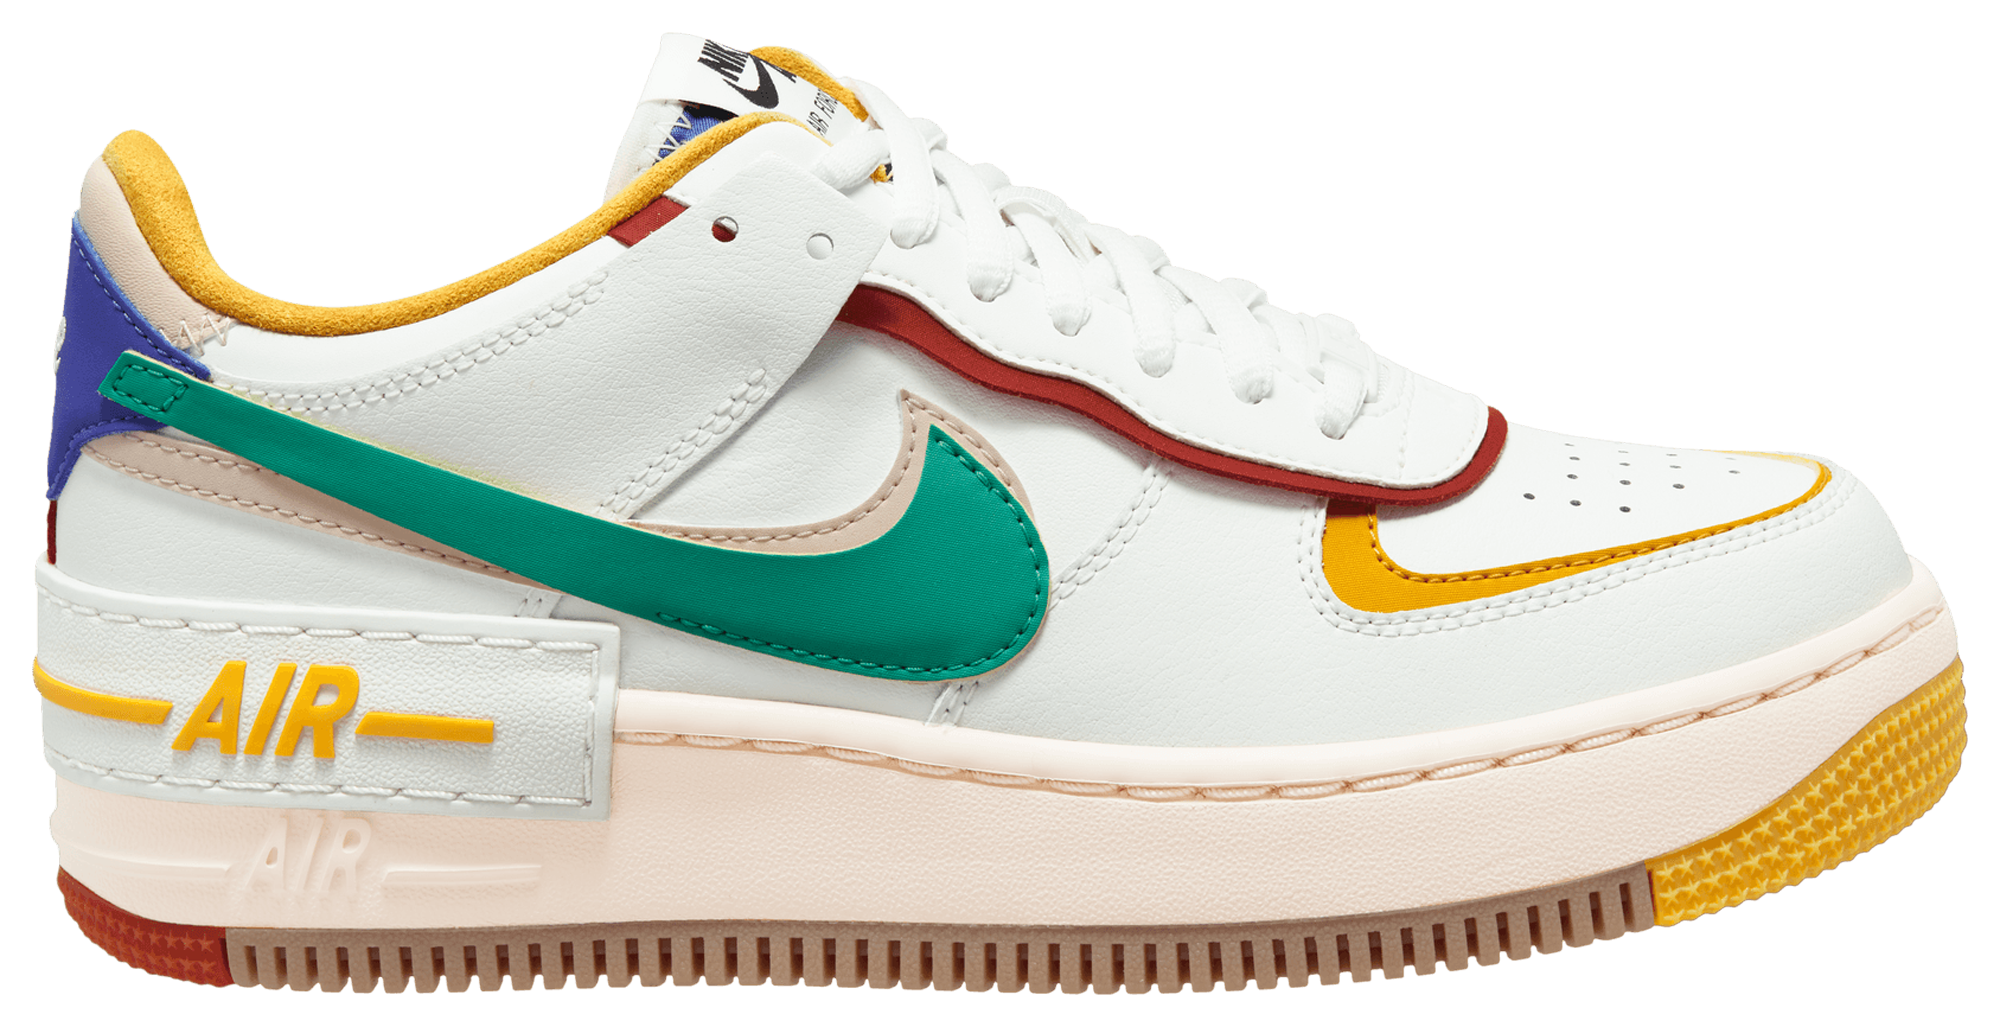 tearaway airforces